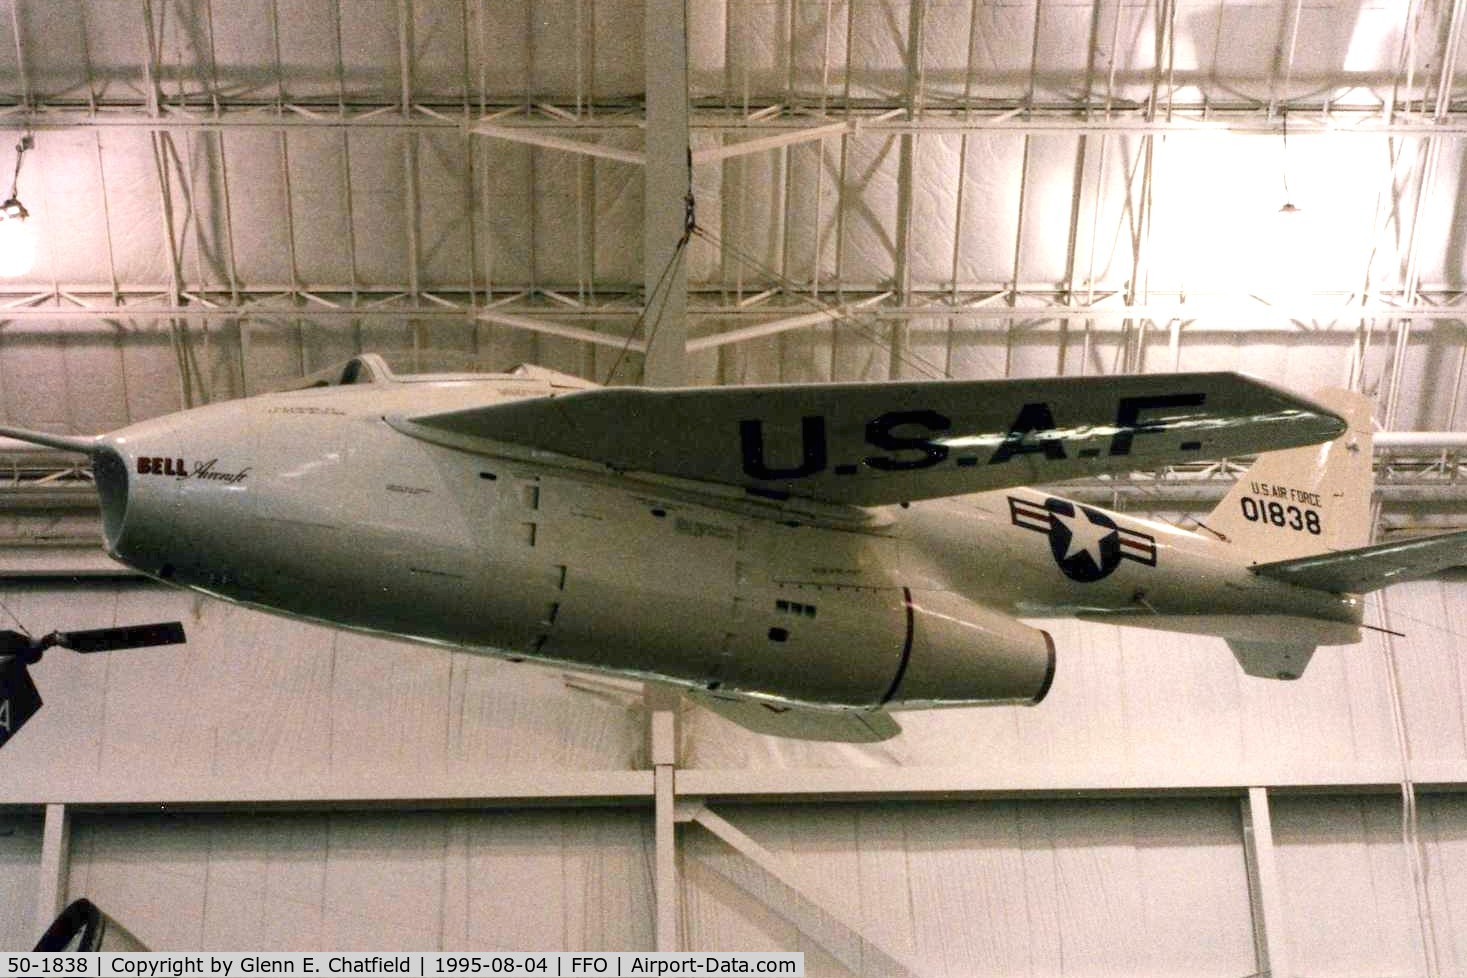 50-1838, 1950 Bell X-5 C/N Not found 50-1838, The Bell X-5 at the National Museum of the U.S. Air Force